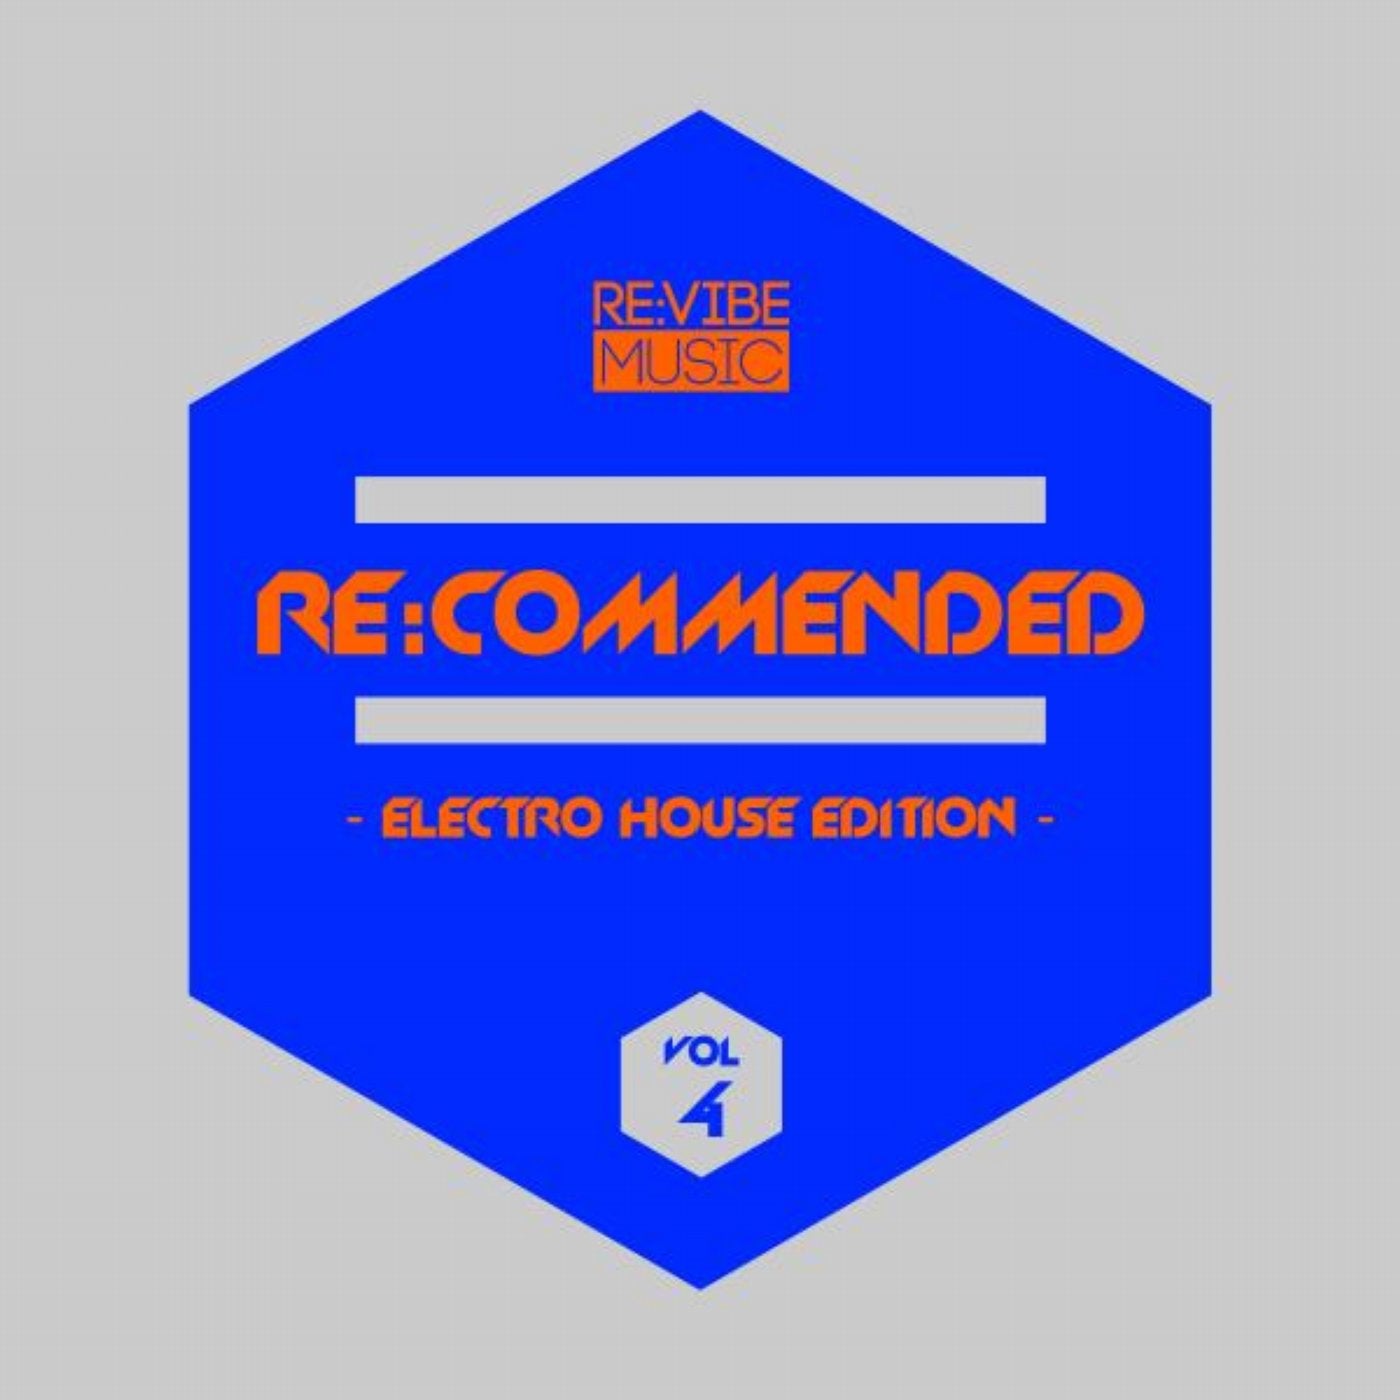 Re:Commended - Electro House Edition, Vol. 4